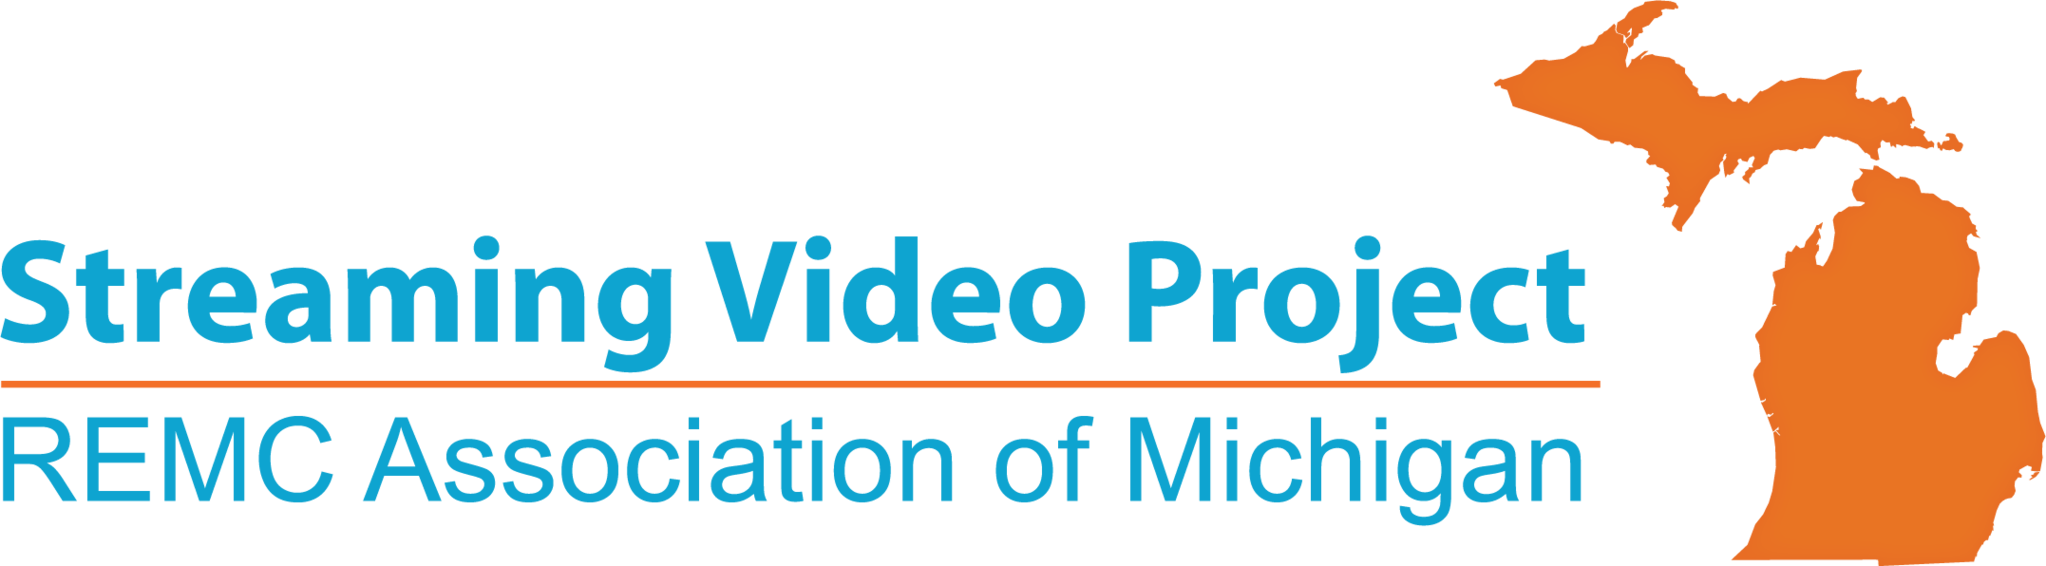 streaming video project logo